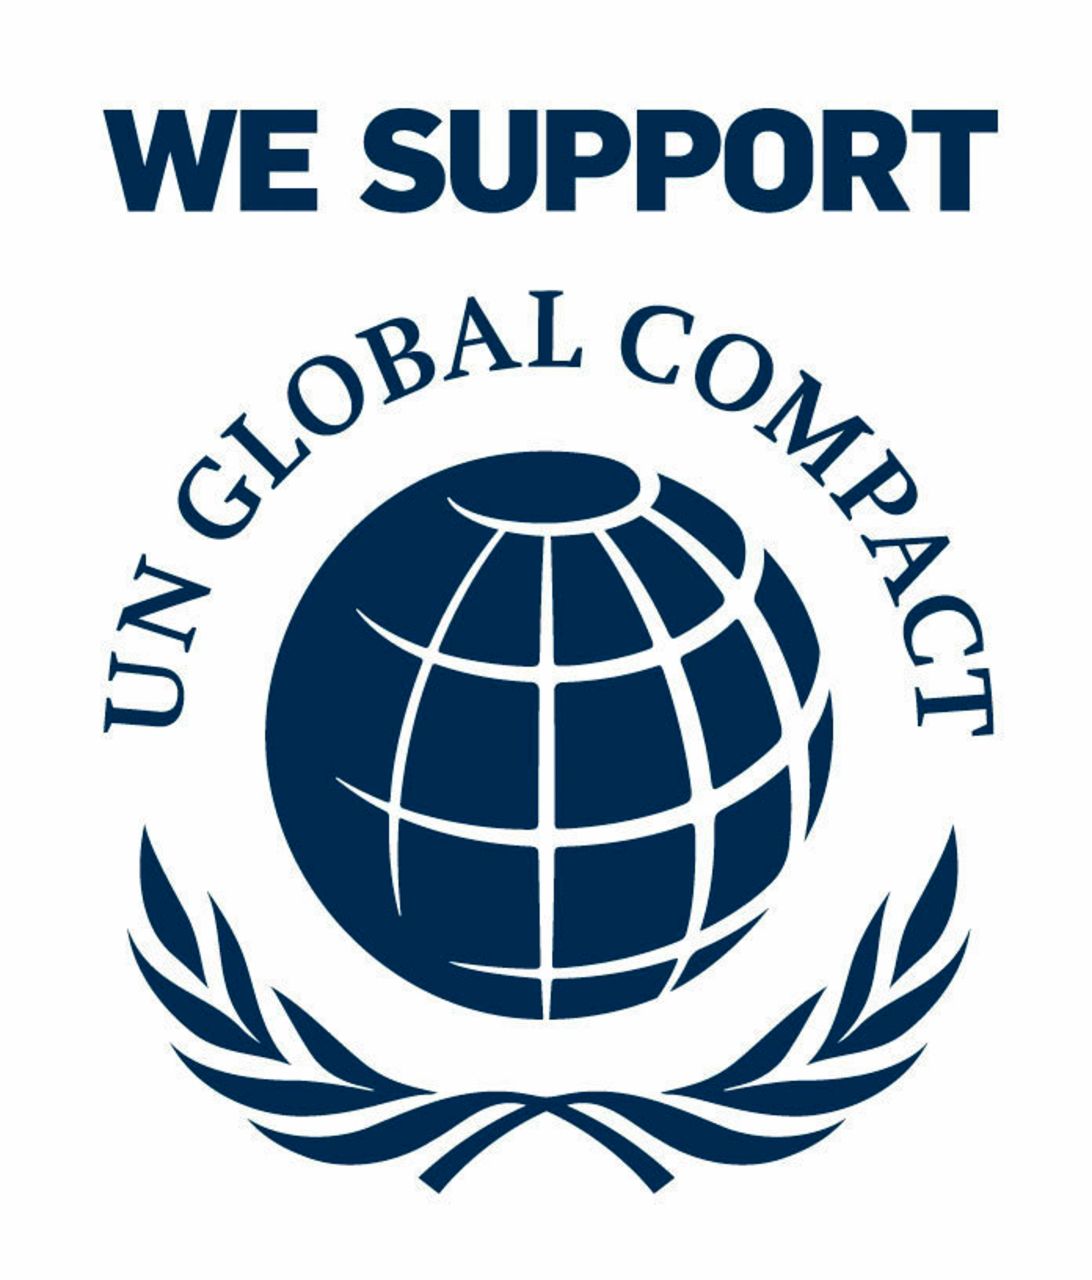 UN Global Compact logo in color